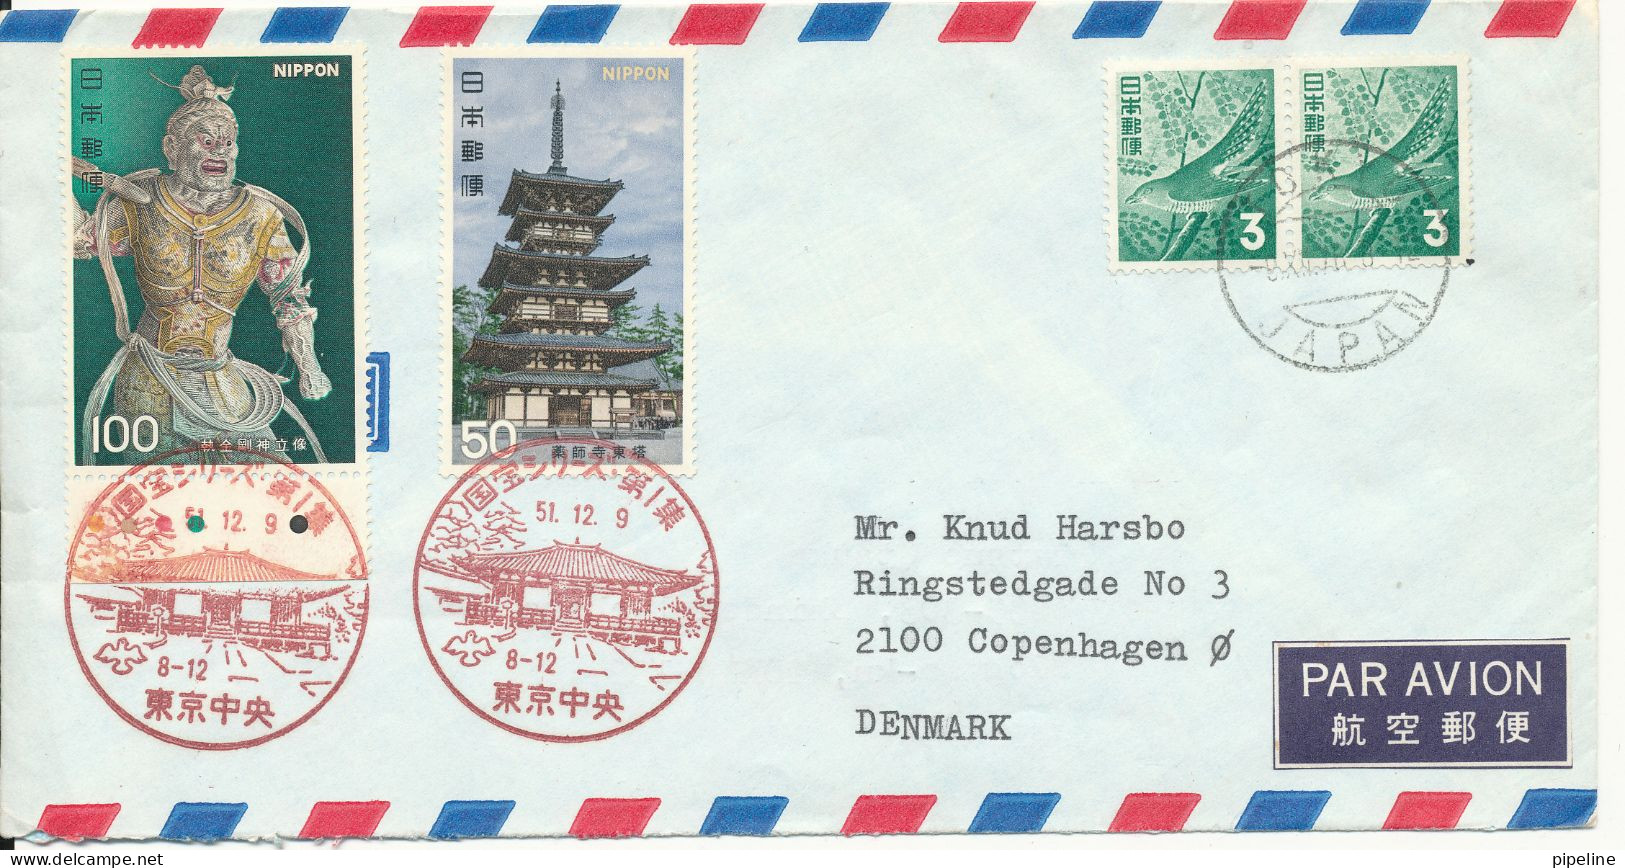 Japan Uprated Air Mail Cover FDC Sent To Denmark Tokyo 9-12-1976 - FDC